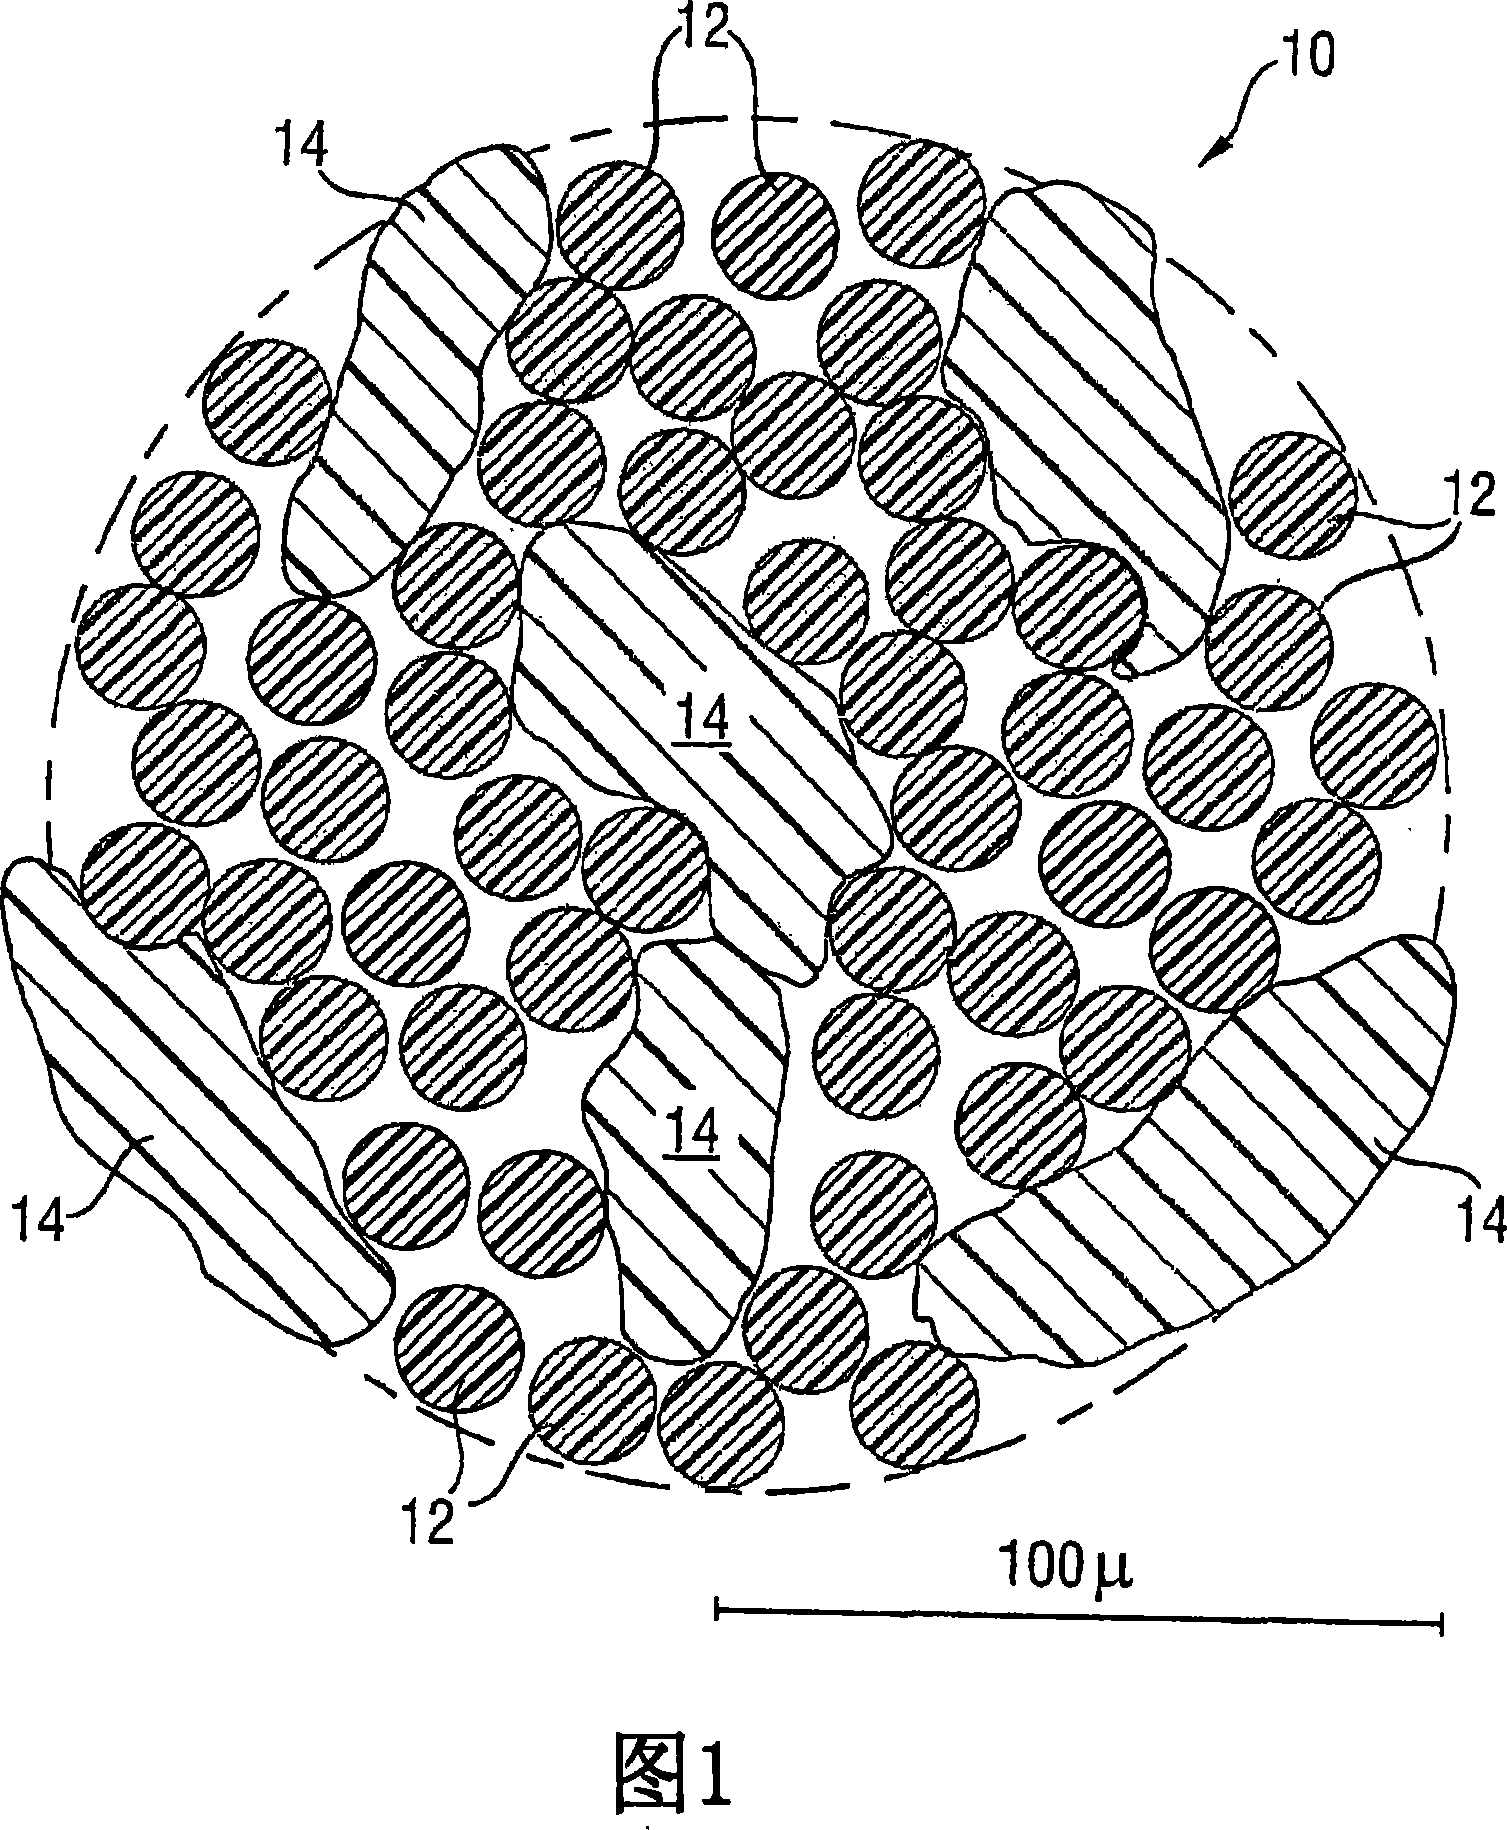 Pivot bearing with plastic outer ring and method for its manufacture